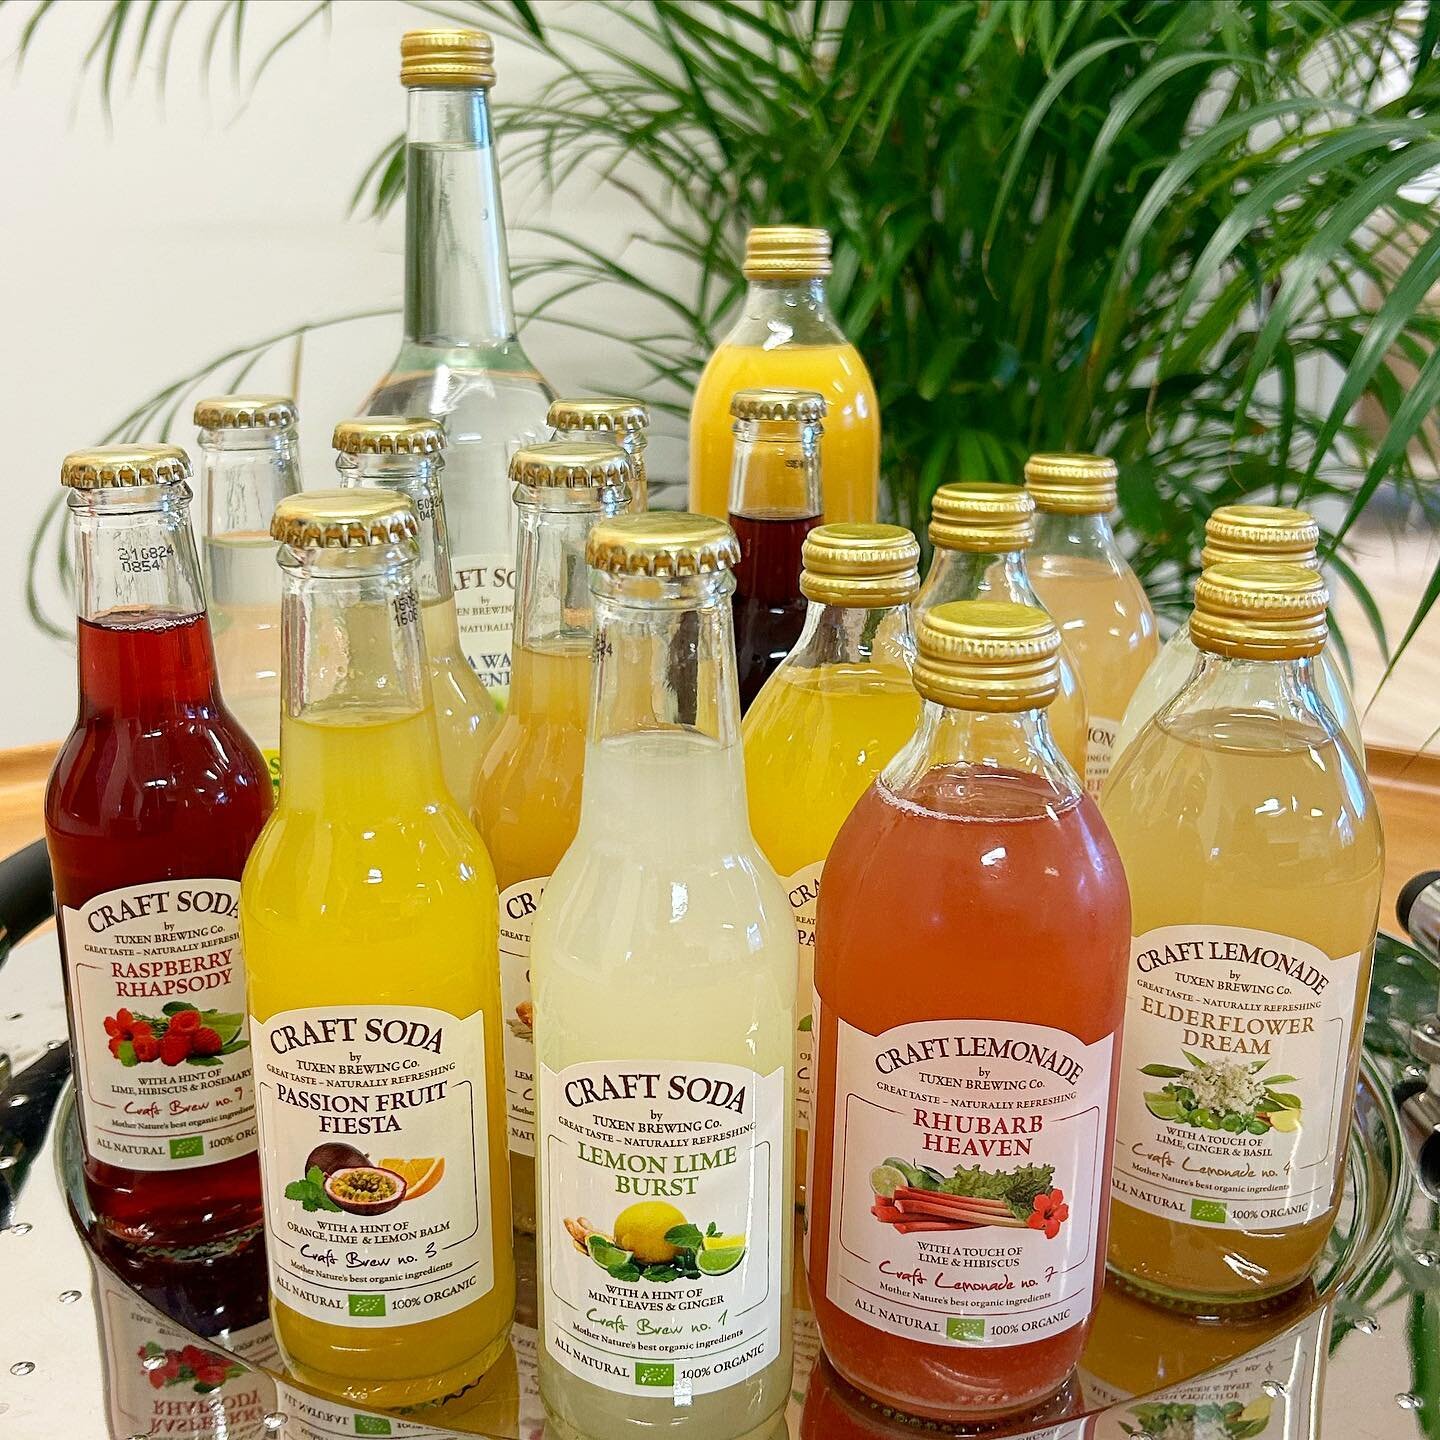 Something to suit all tastes. Sparkling or non-sparkling &hellip; the choice is yours. Cheers! 💚😋 www.craftsoda.dk @craft.soda #gourmetsoda #nonalcoholicdrink #craftsoda  #organic #madeindenmark #tuxenbrewingcompany